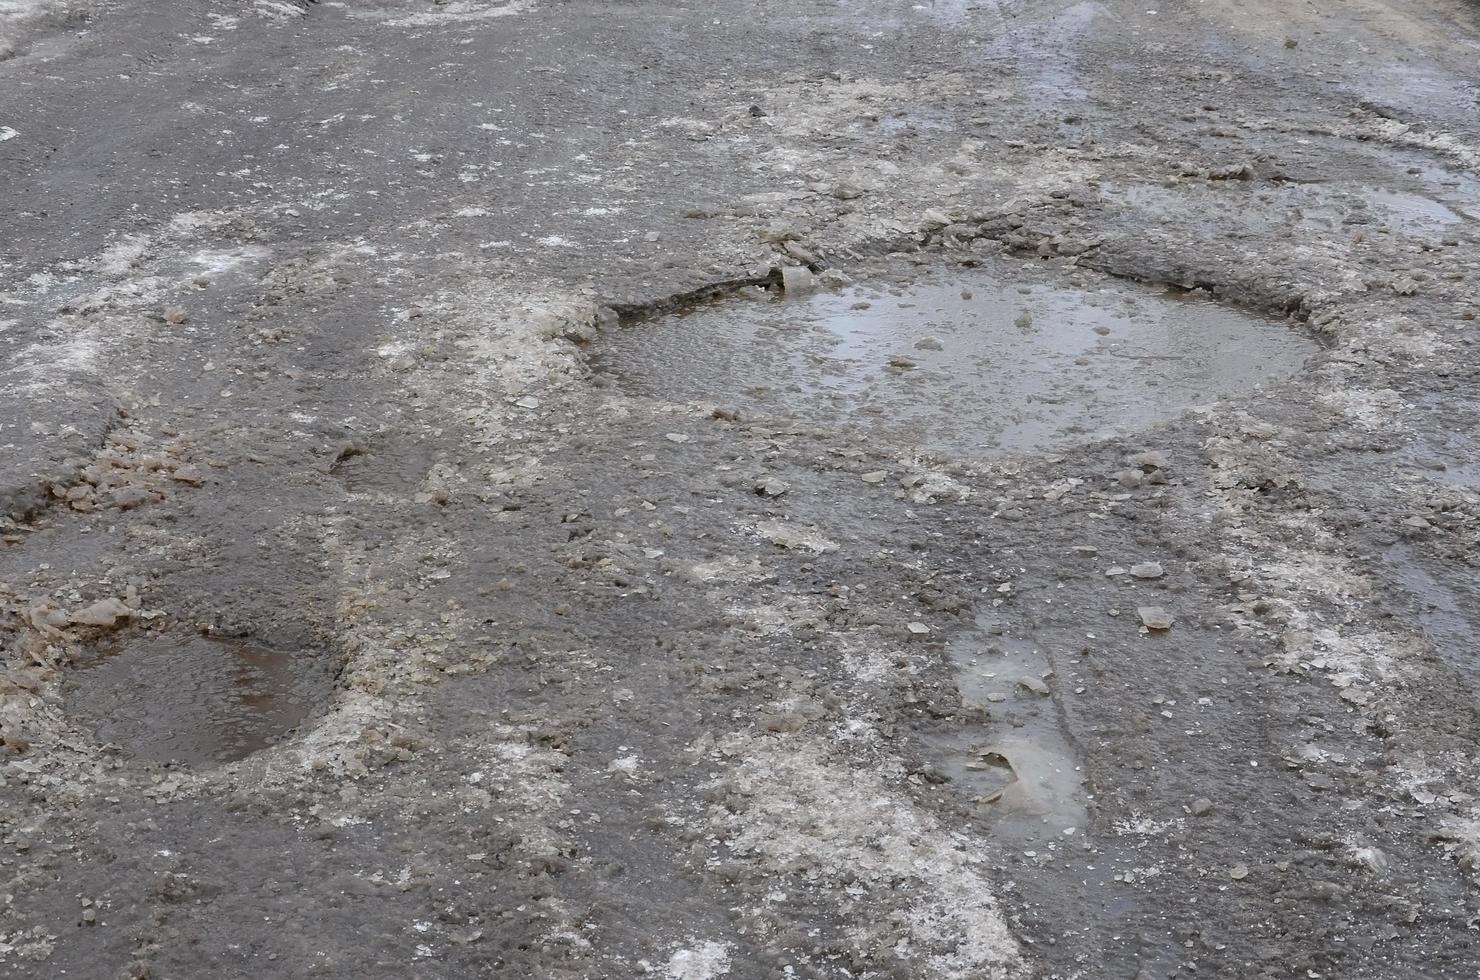 Damaged asphalt road with potholes caused by freezing and thawing cycles during the winter. Poor road photo